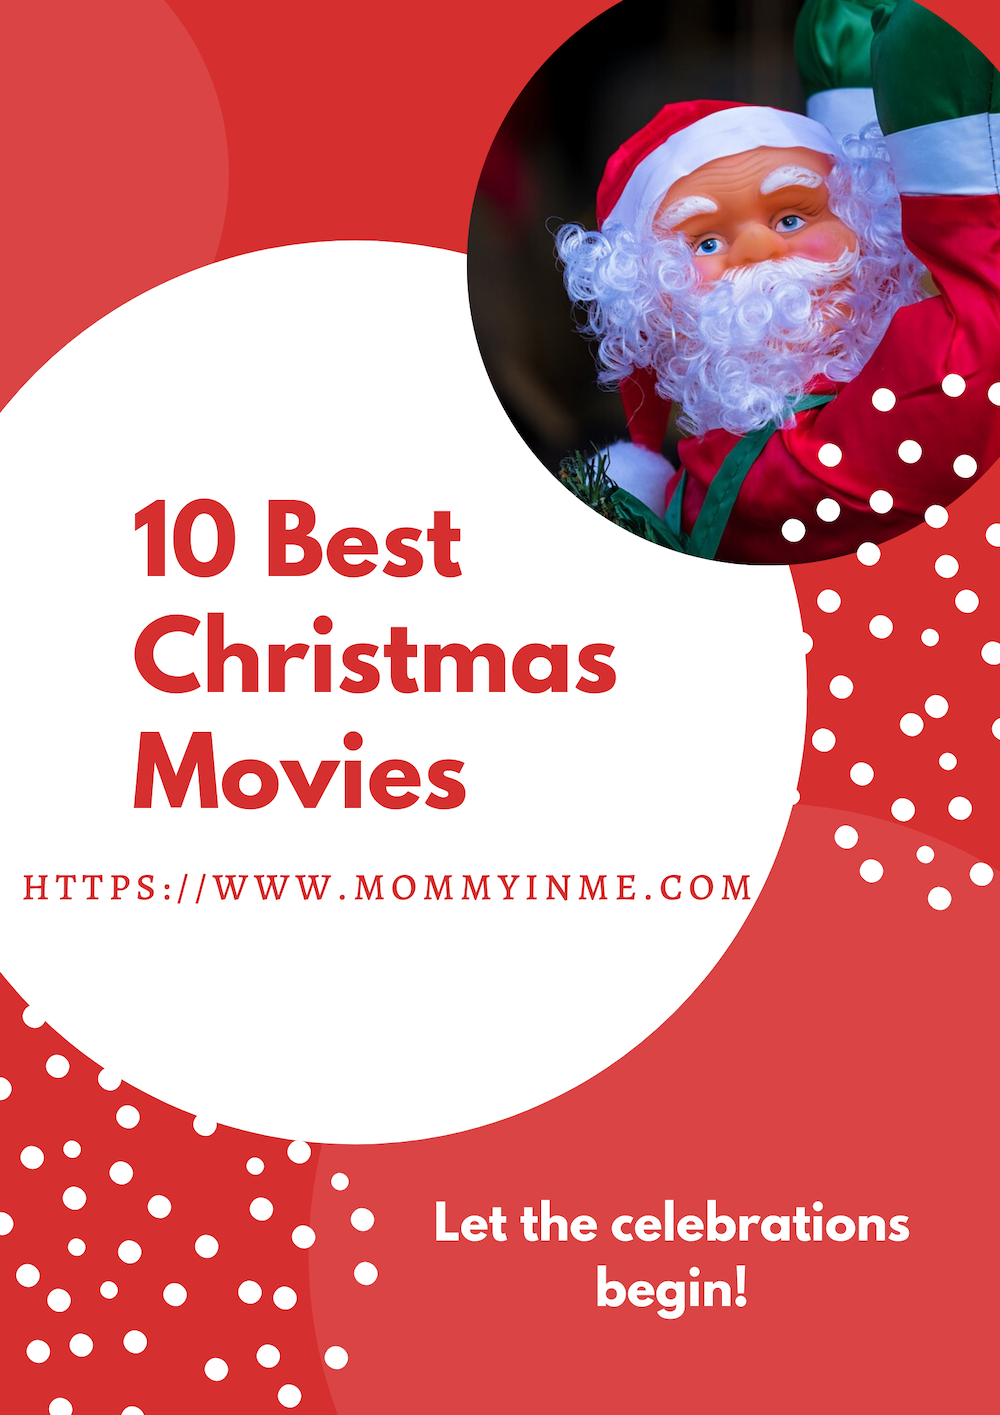 With Christmas and holiday season rigtht here, watch these 10 Best Christmas Movies on Amazon prime and Netflix sipping Hot chocolate with kids. #ChristmasMovies #bestchristmasmovies #movies #Santaclaus #santamovie #kidsmovie #shrekmovie #christmasgifts